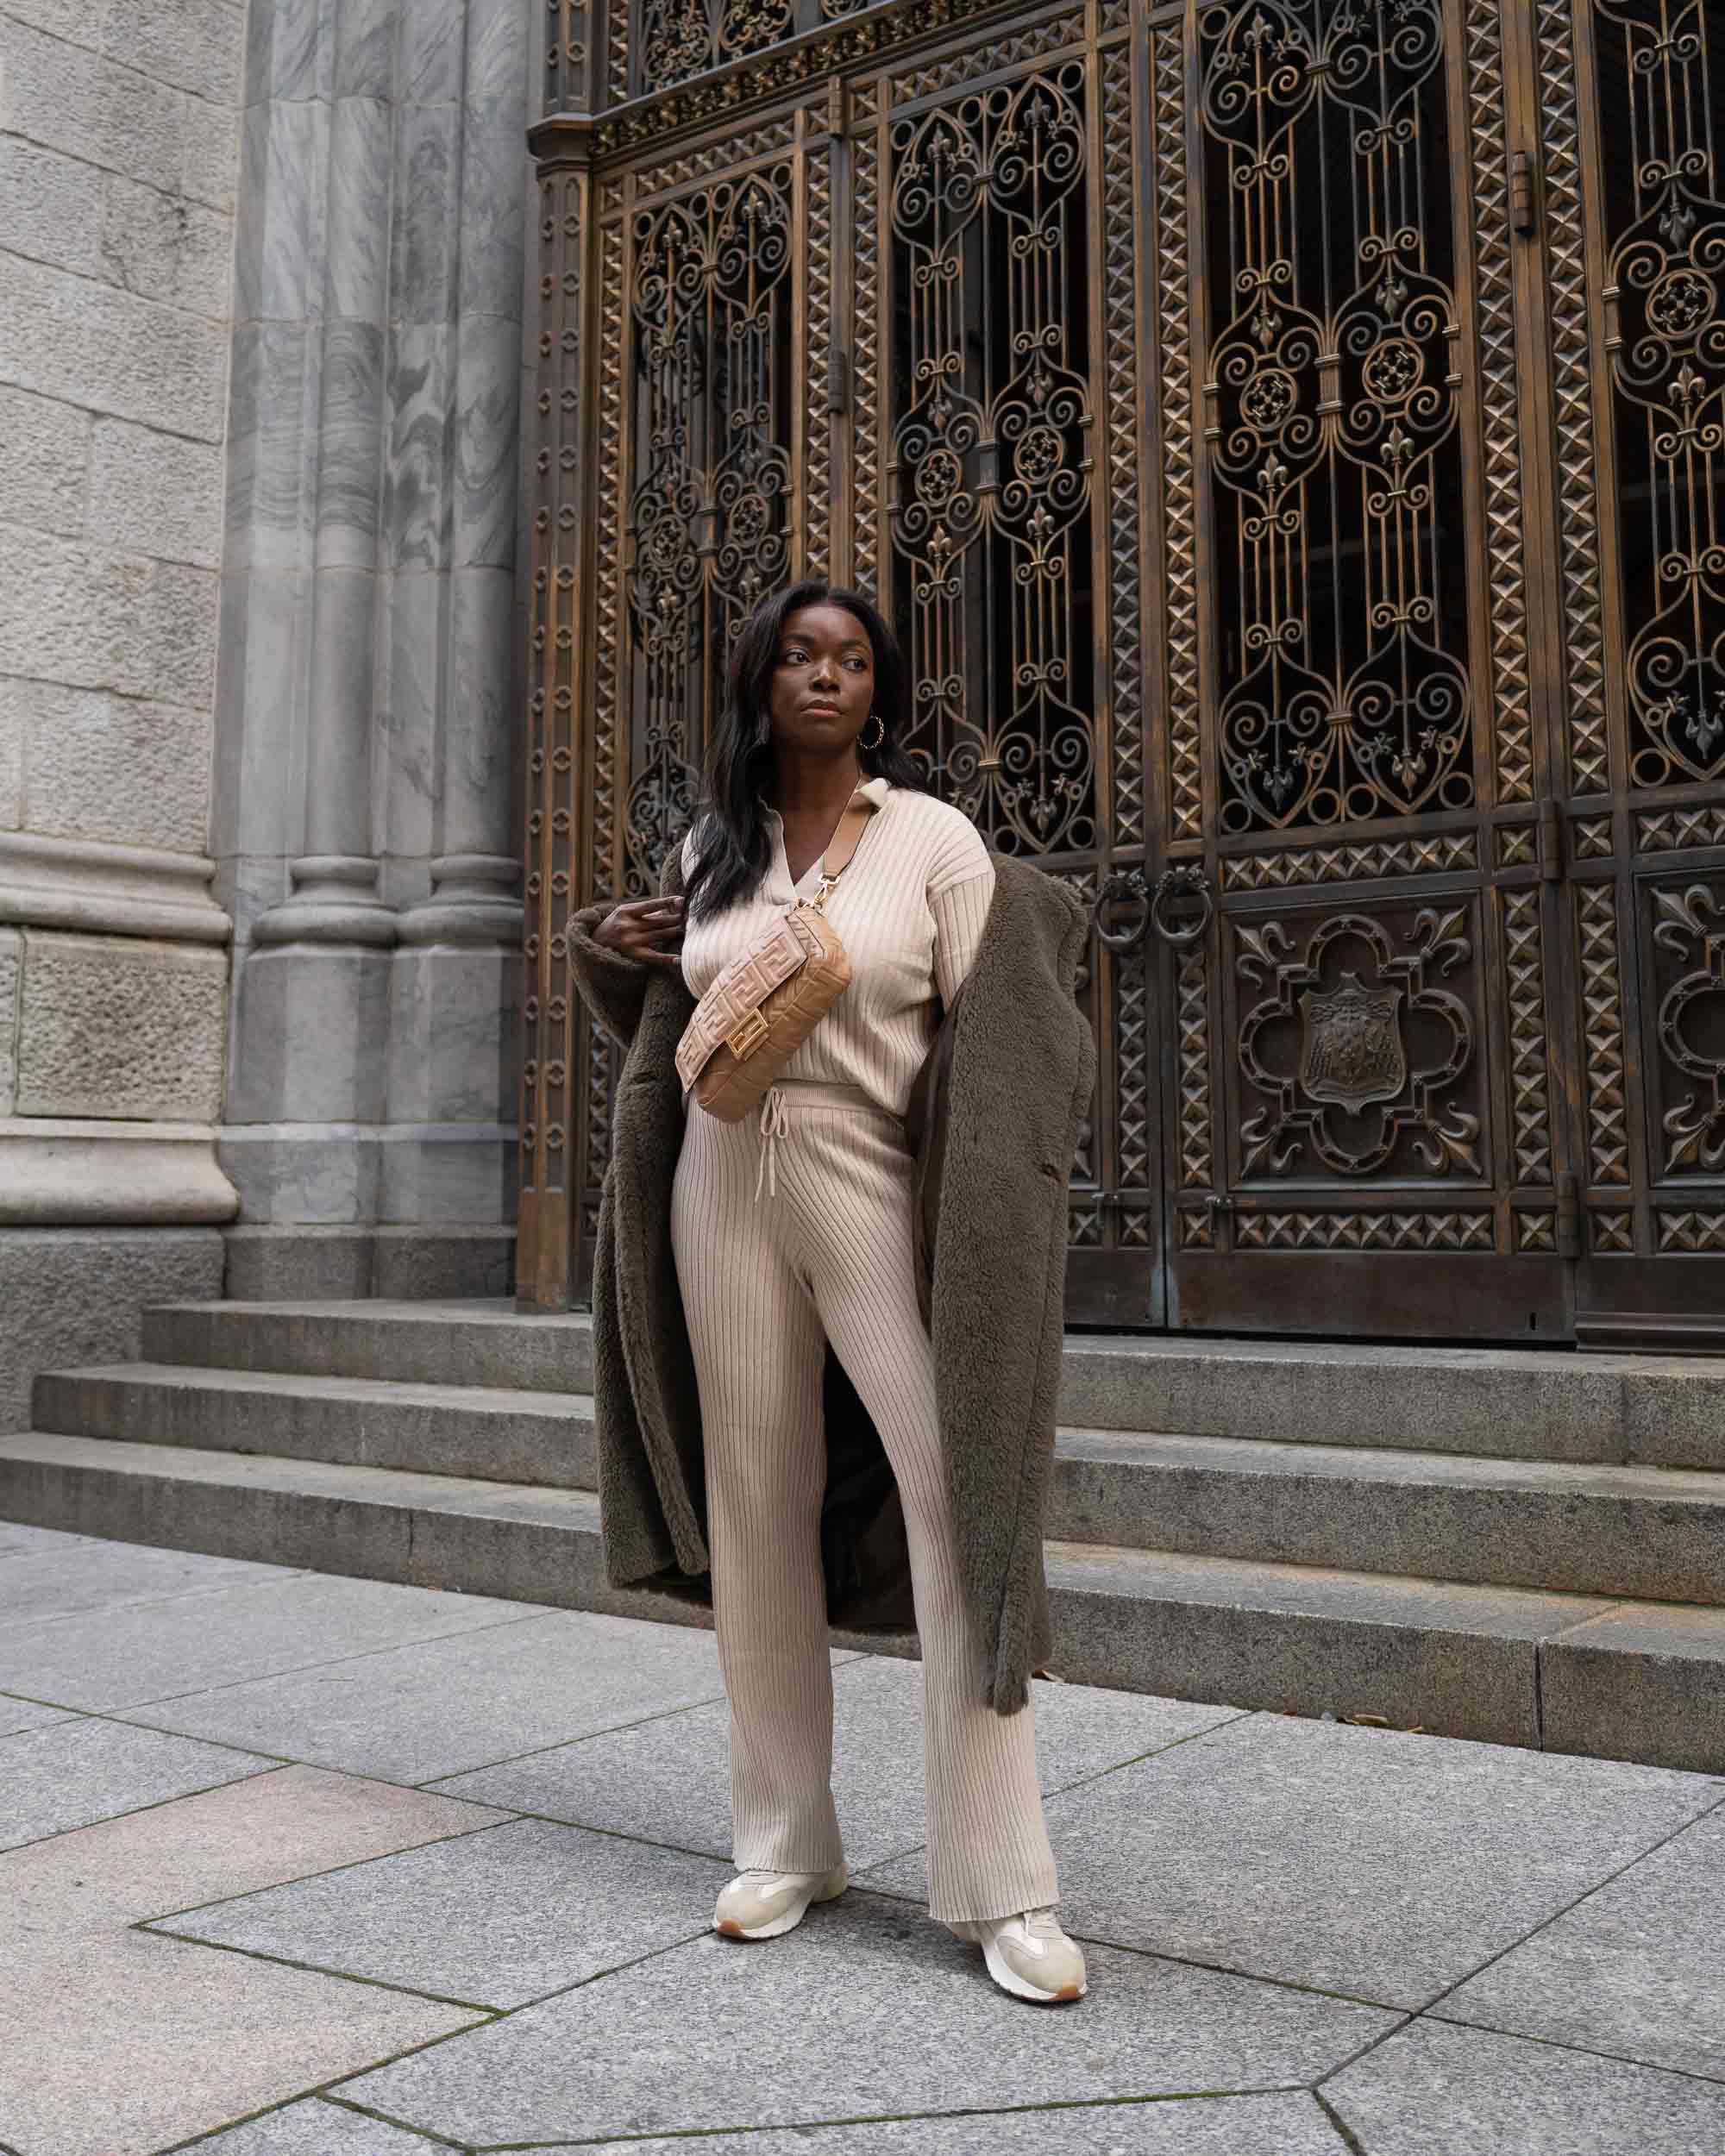 Max Mara Teddy Coat: Get the Look for Less » coco bassey